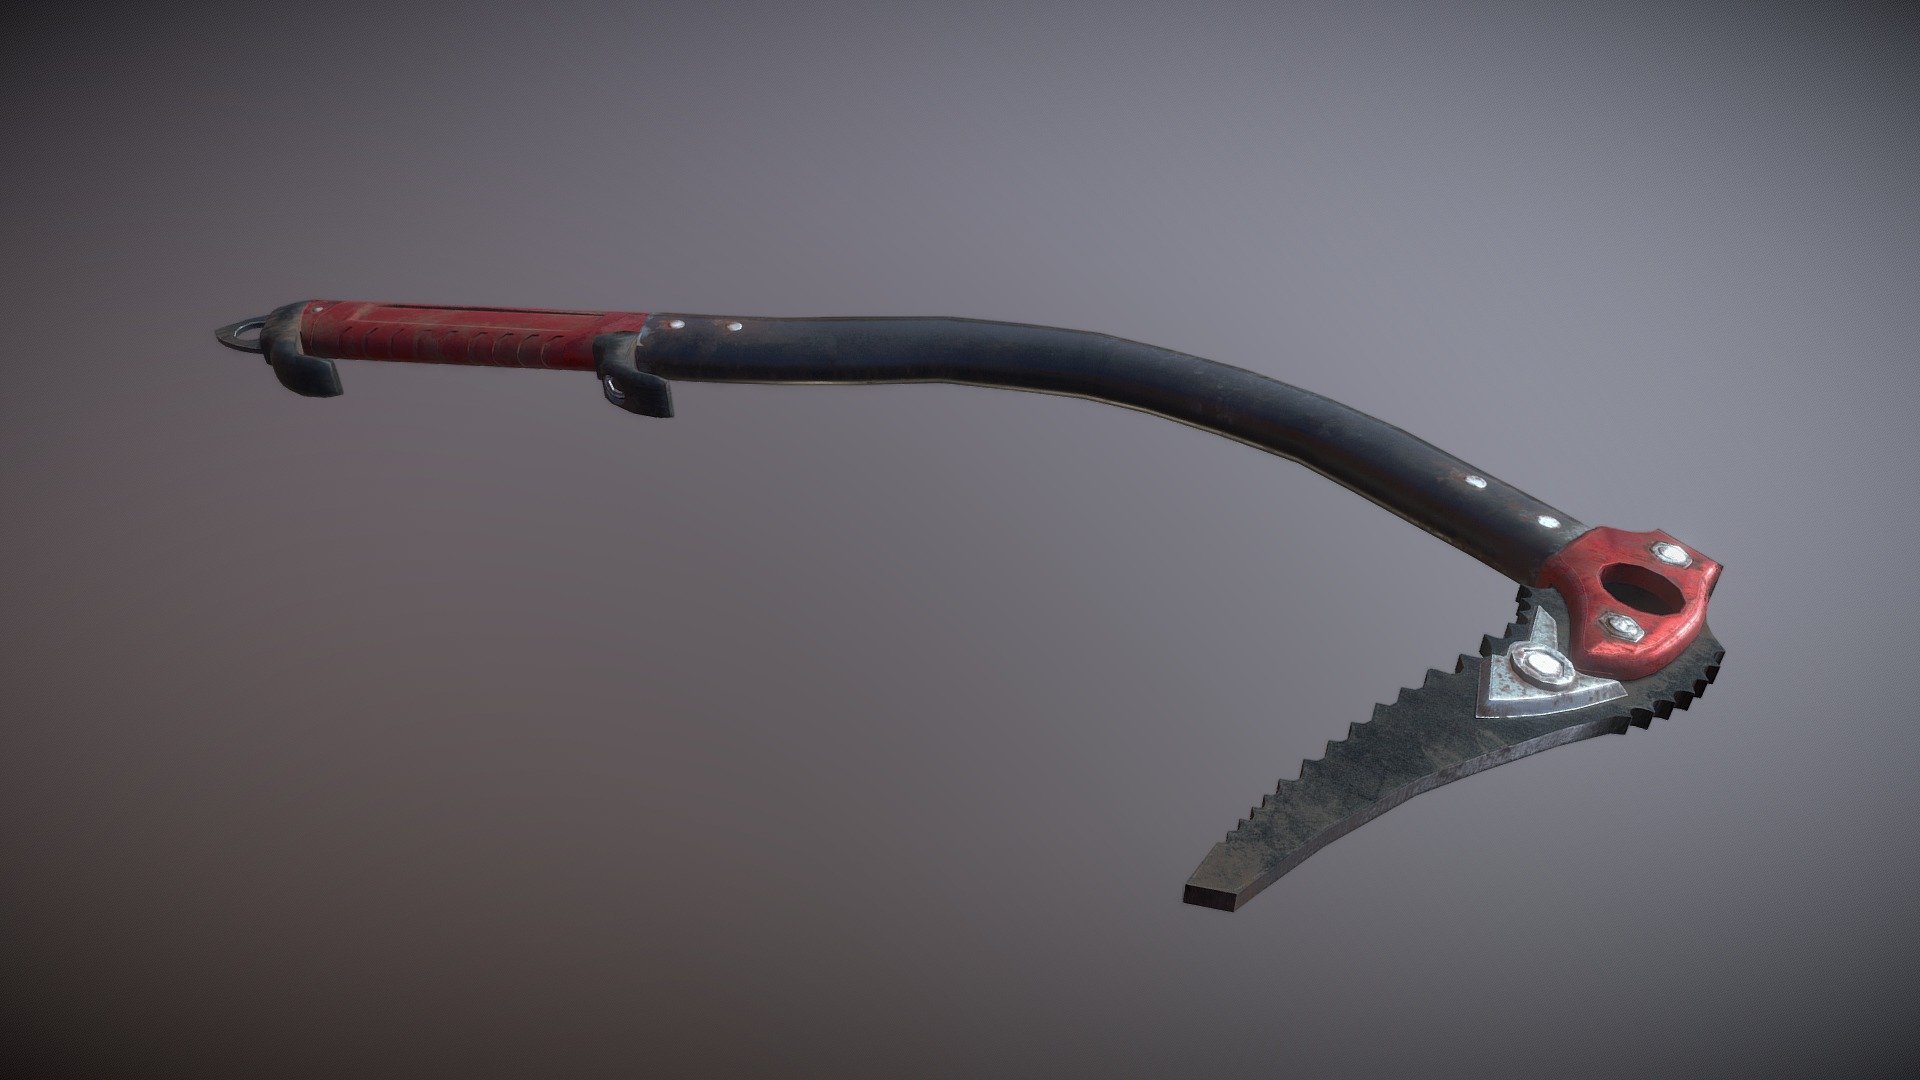 Low poly model of an apex climbing axe made for game asset pipeline 3d model